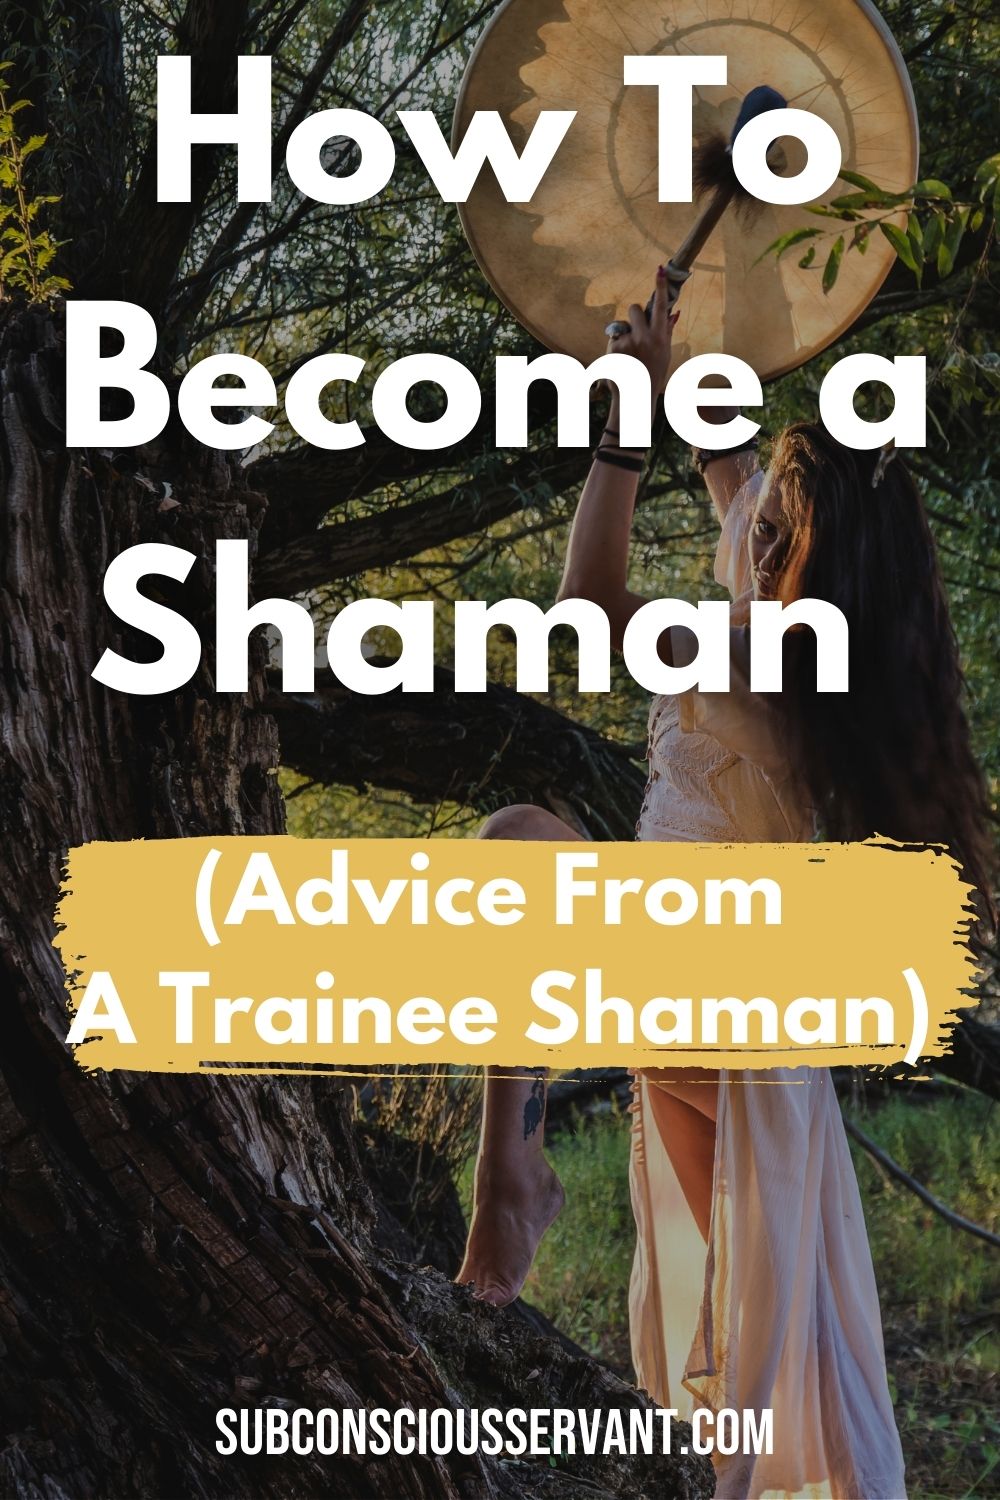 How To Become a Shaman (Advice From A Trainee Shaman)